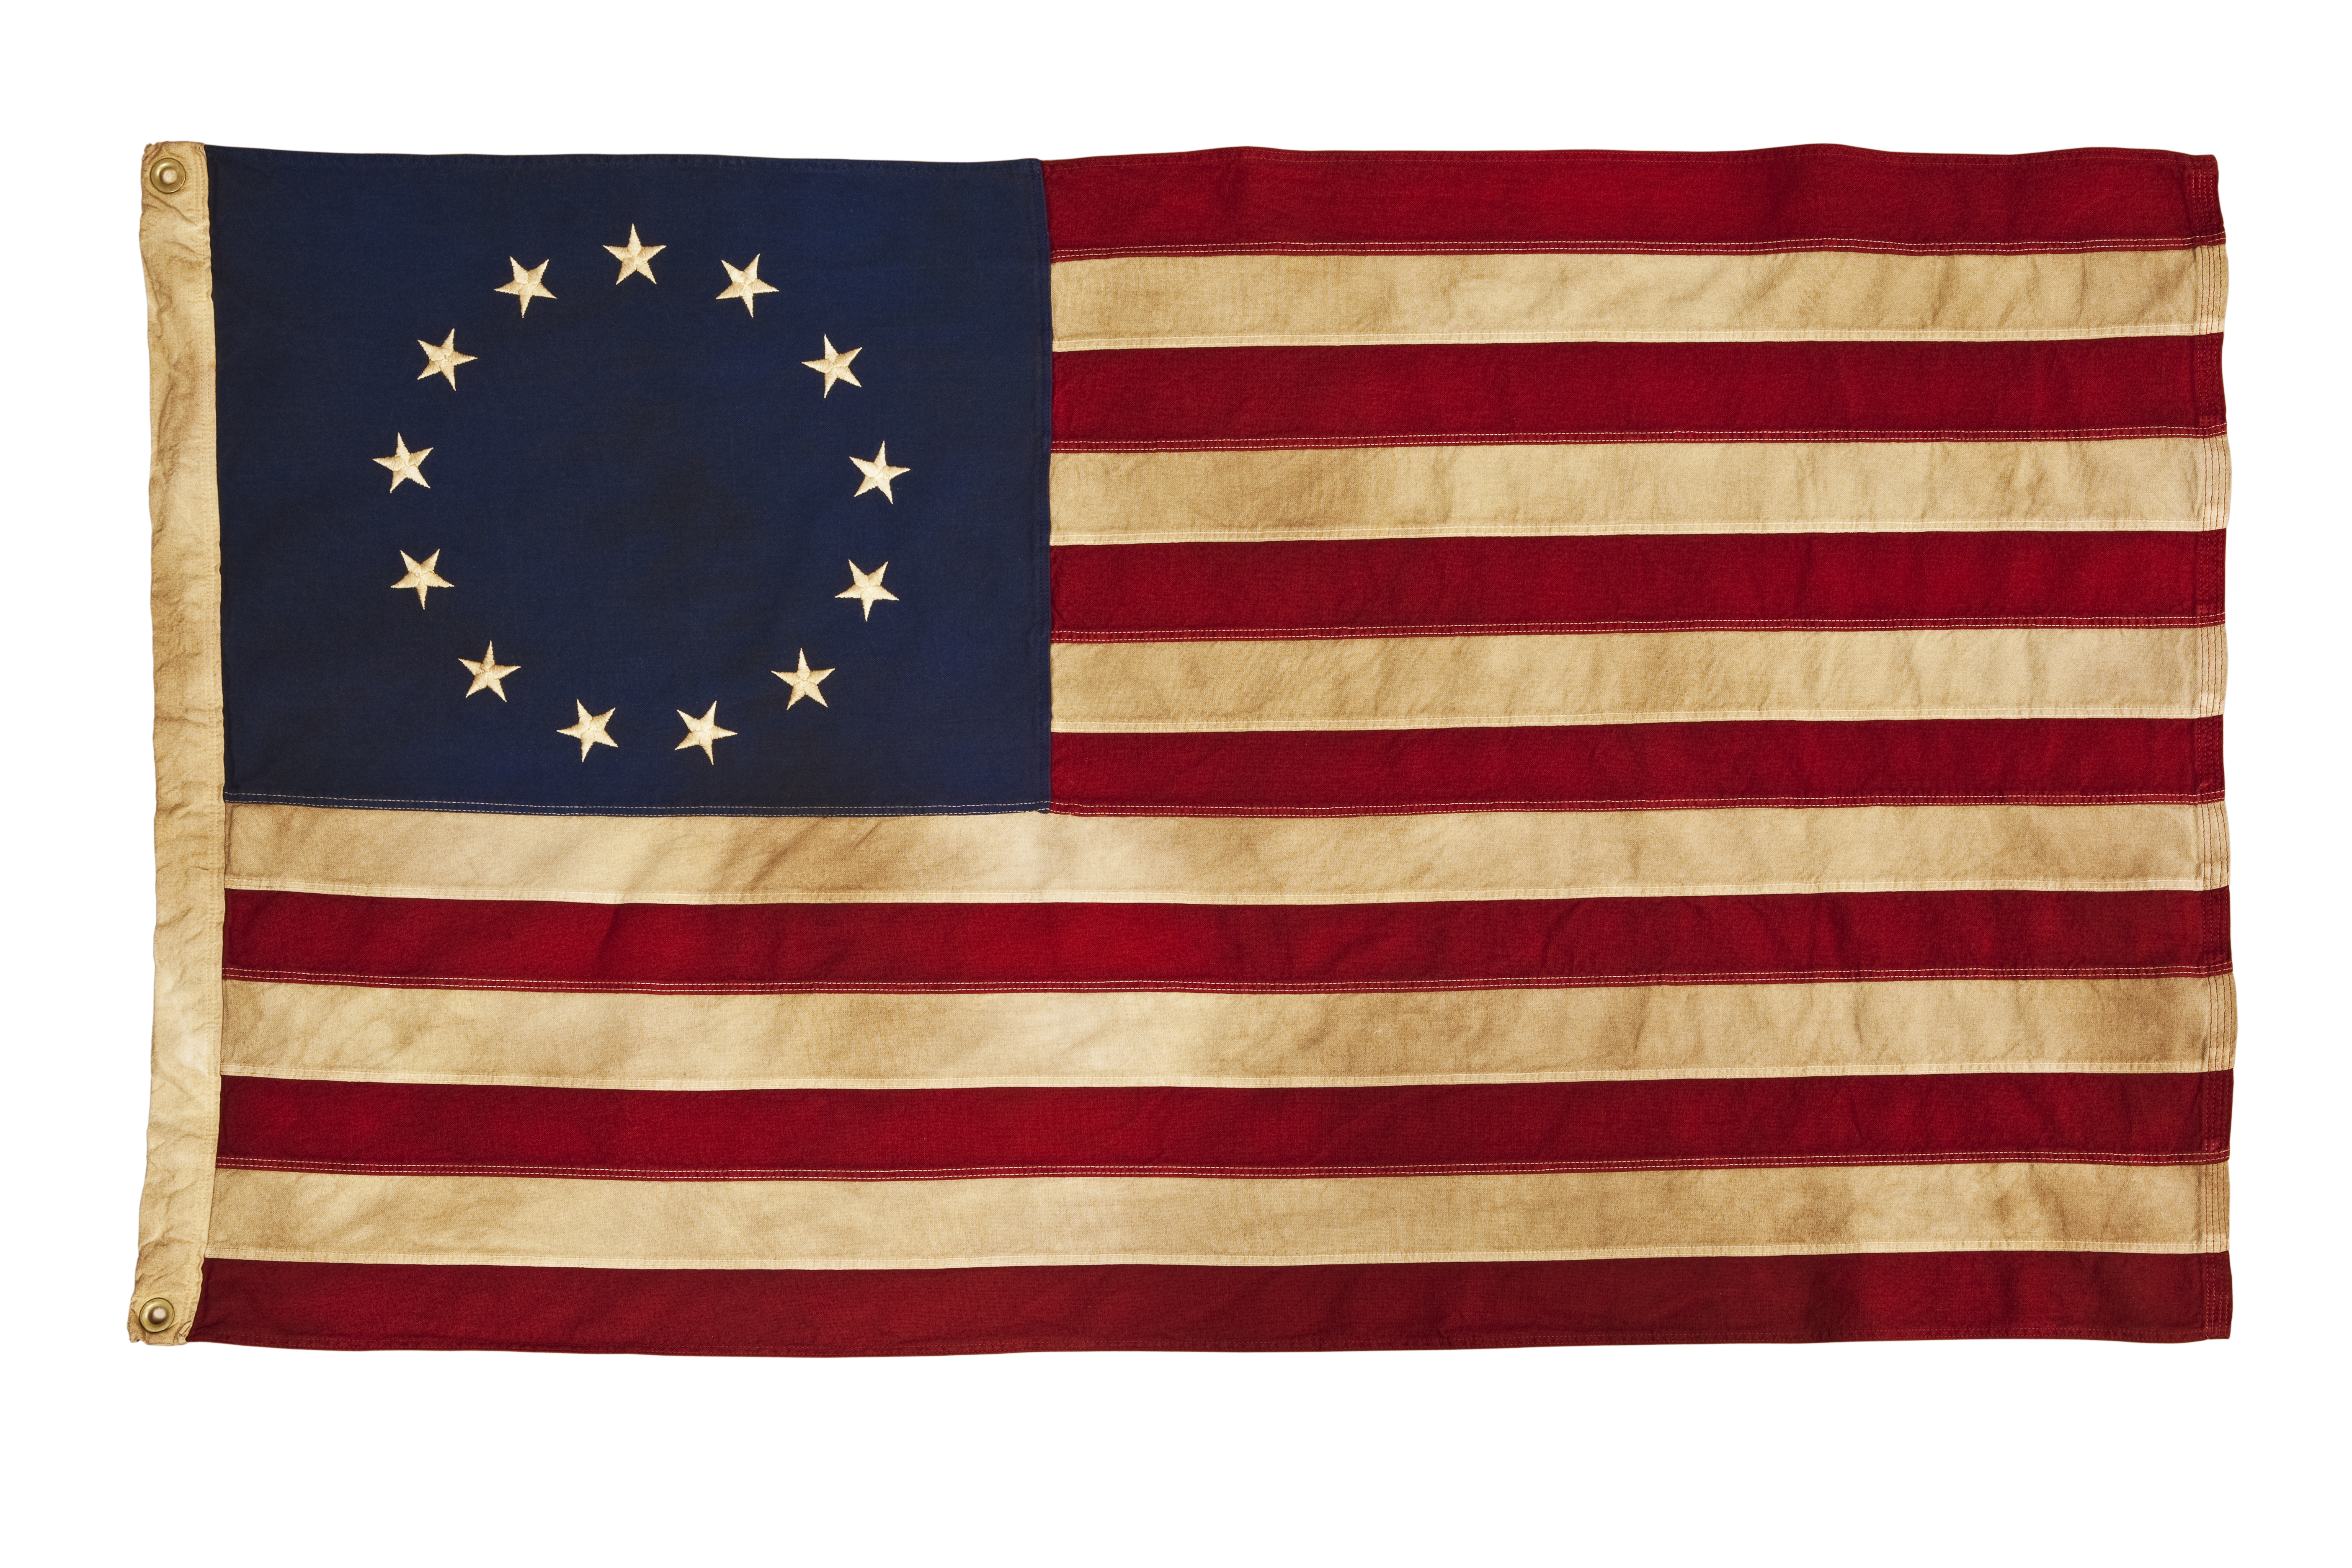 The Betsy Ross